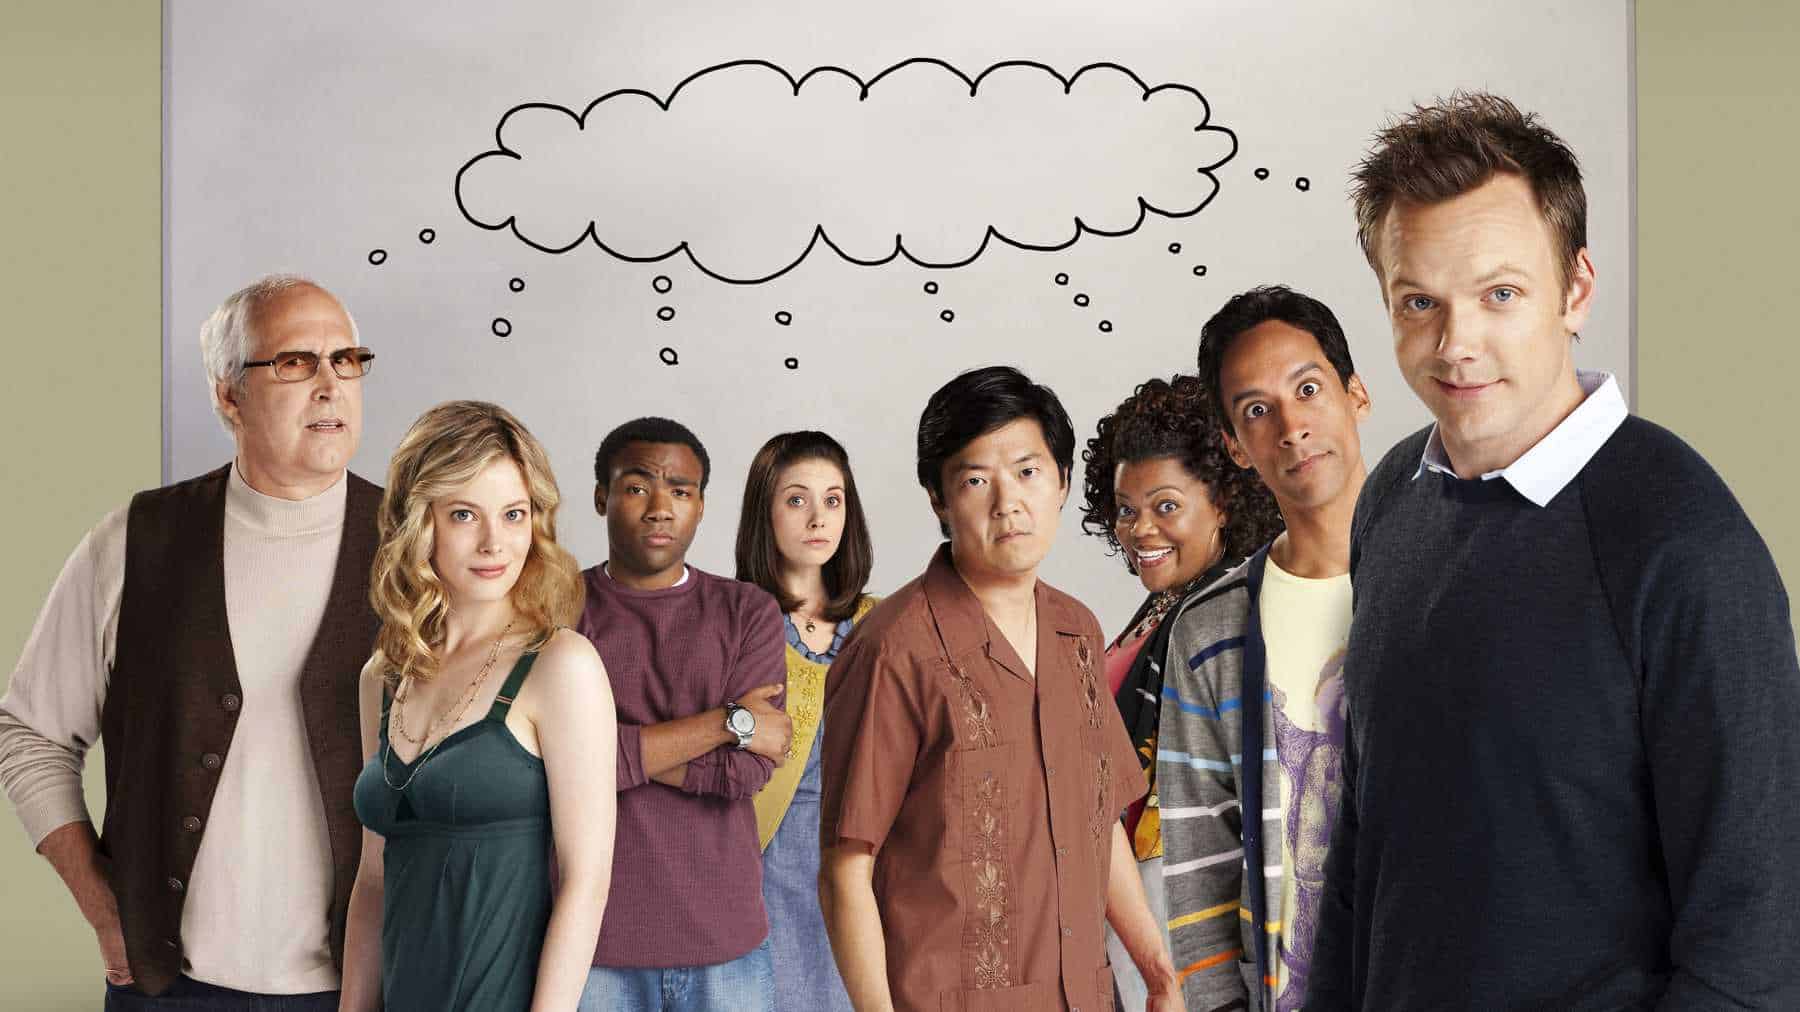 Image of the cast of the show, Community.